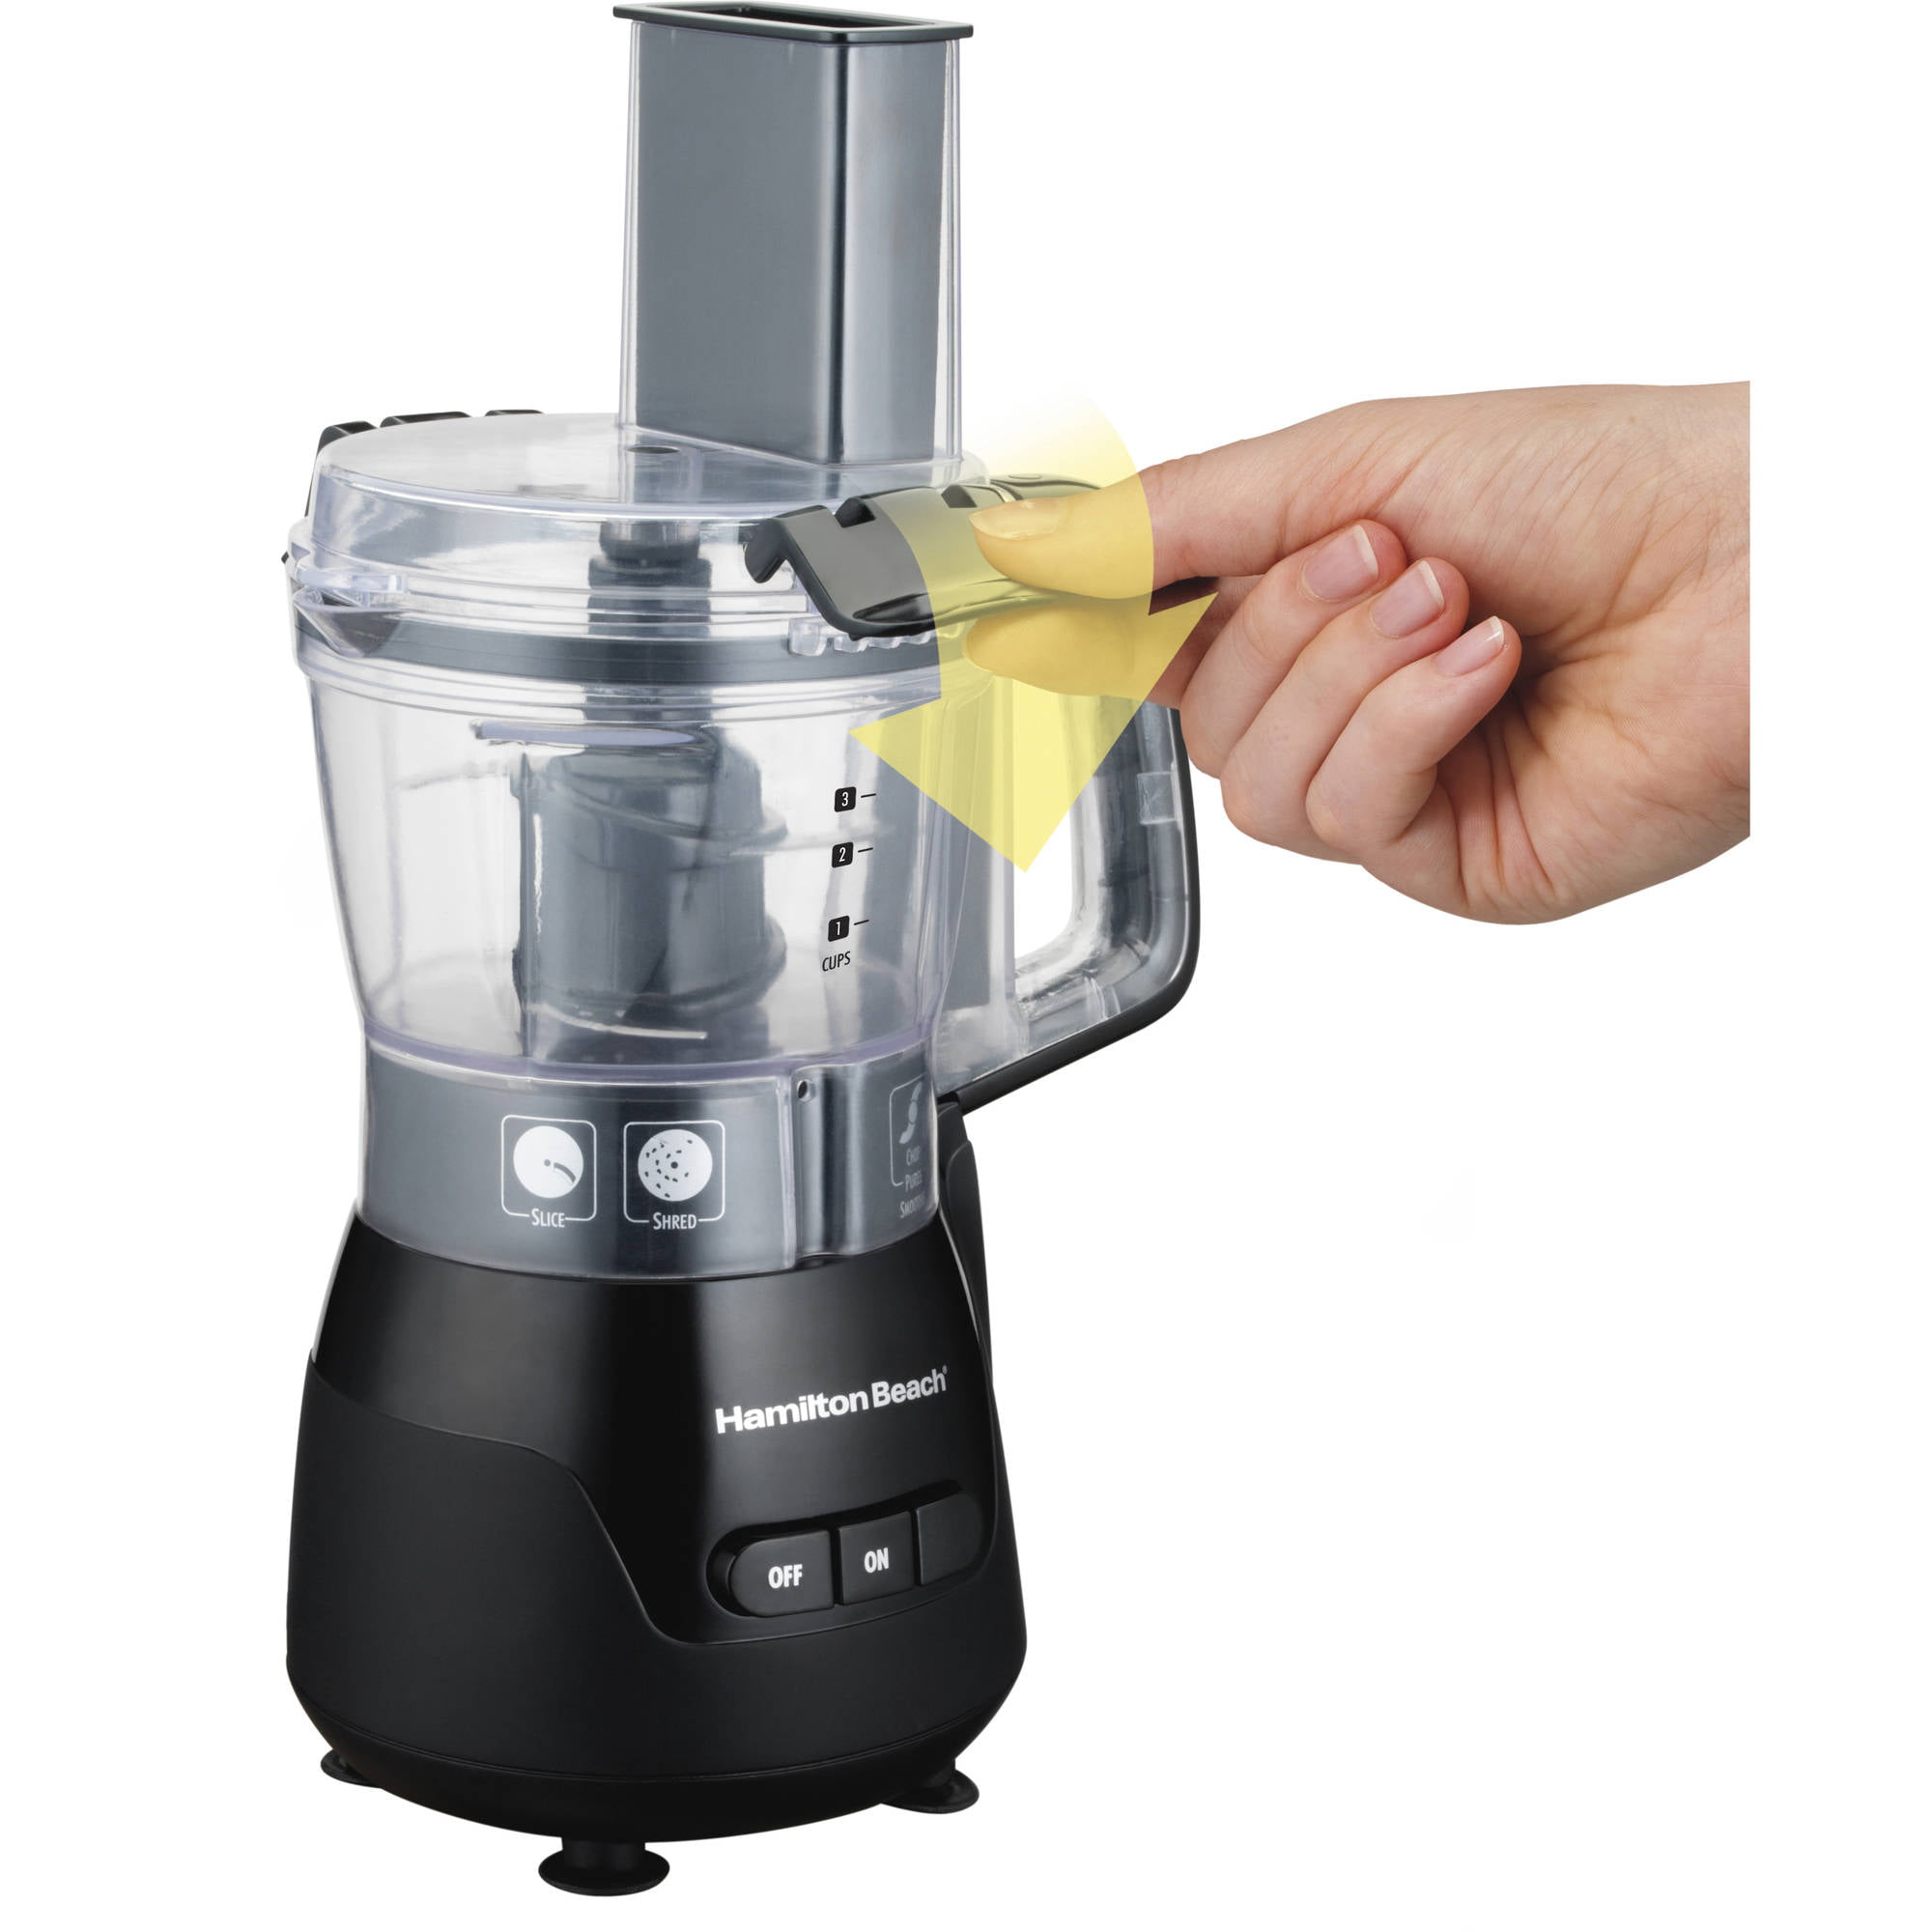 Hamilton Beach 10-Cup Stack & Snap™ Food Processor with Bowl